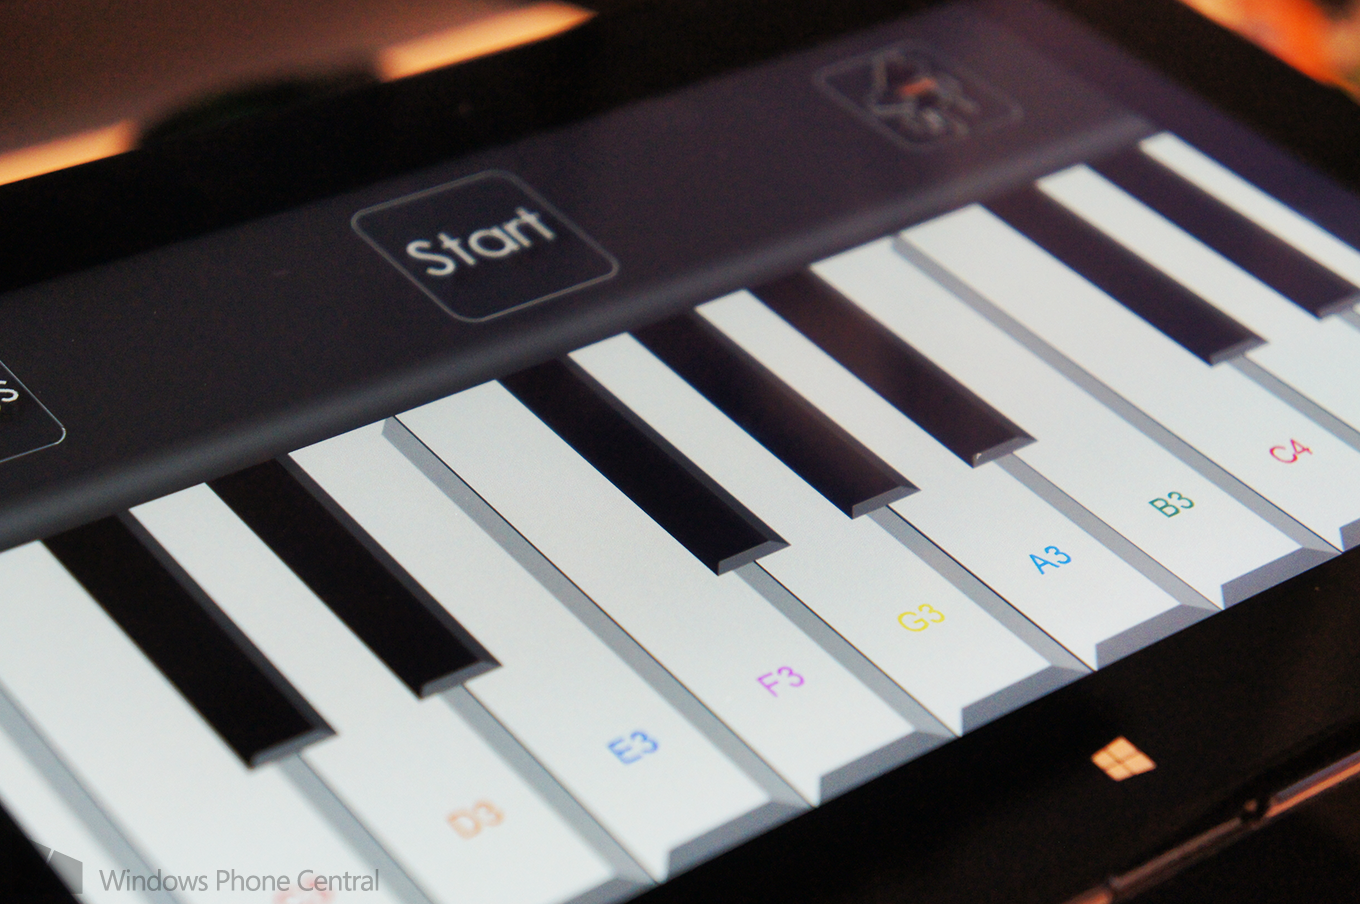 Turn your Windows 8.1 device into a virtual keyboard with Piano!! from